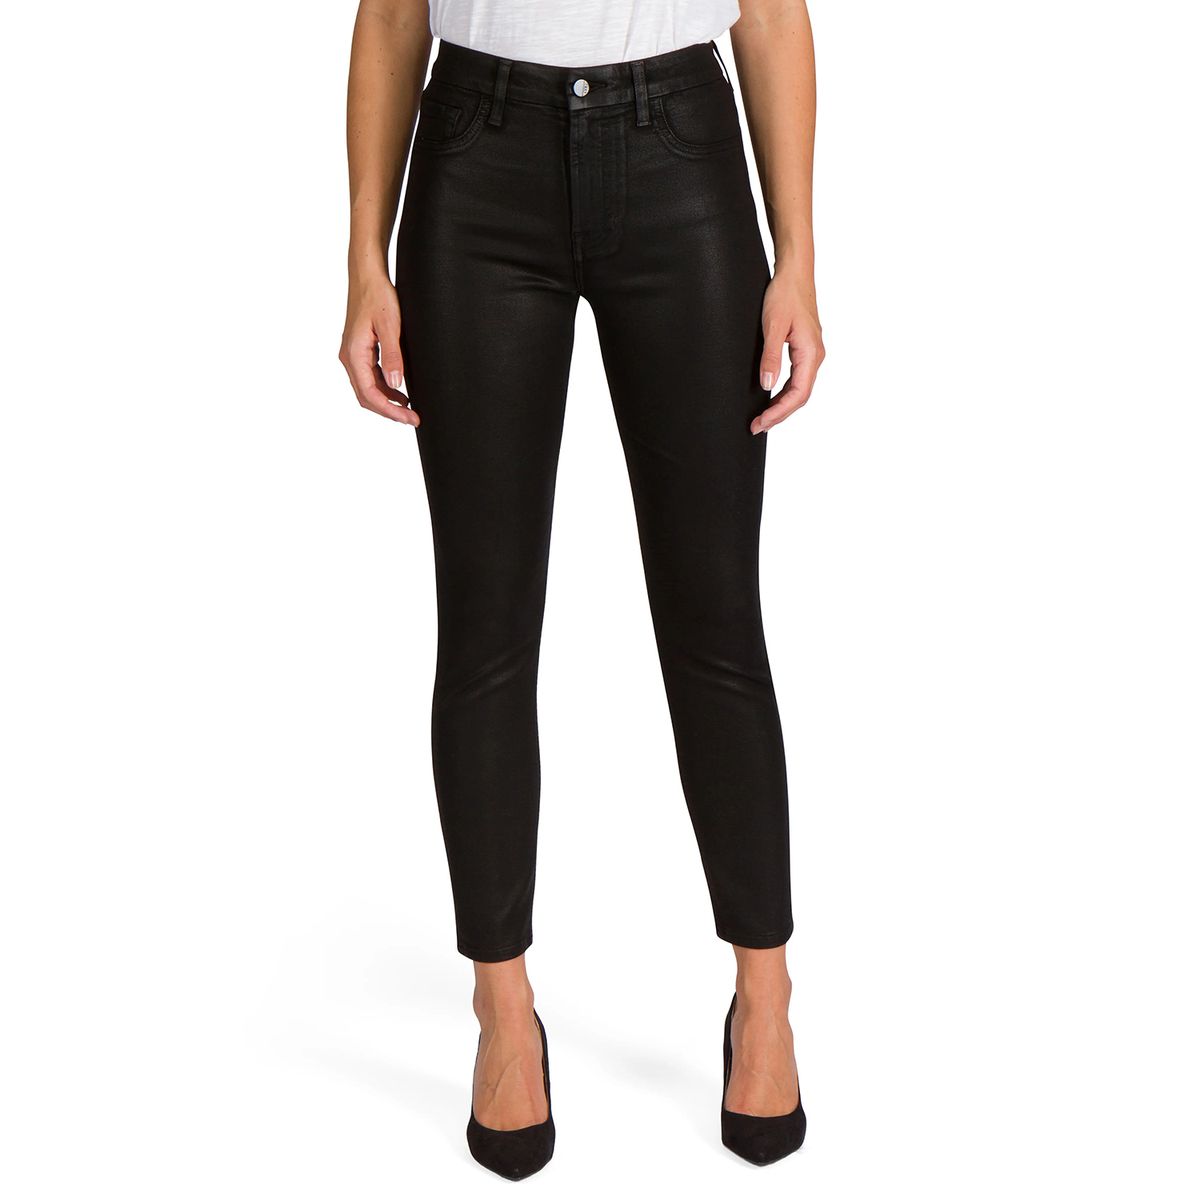 jen7 7 for all mankind jeans